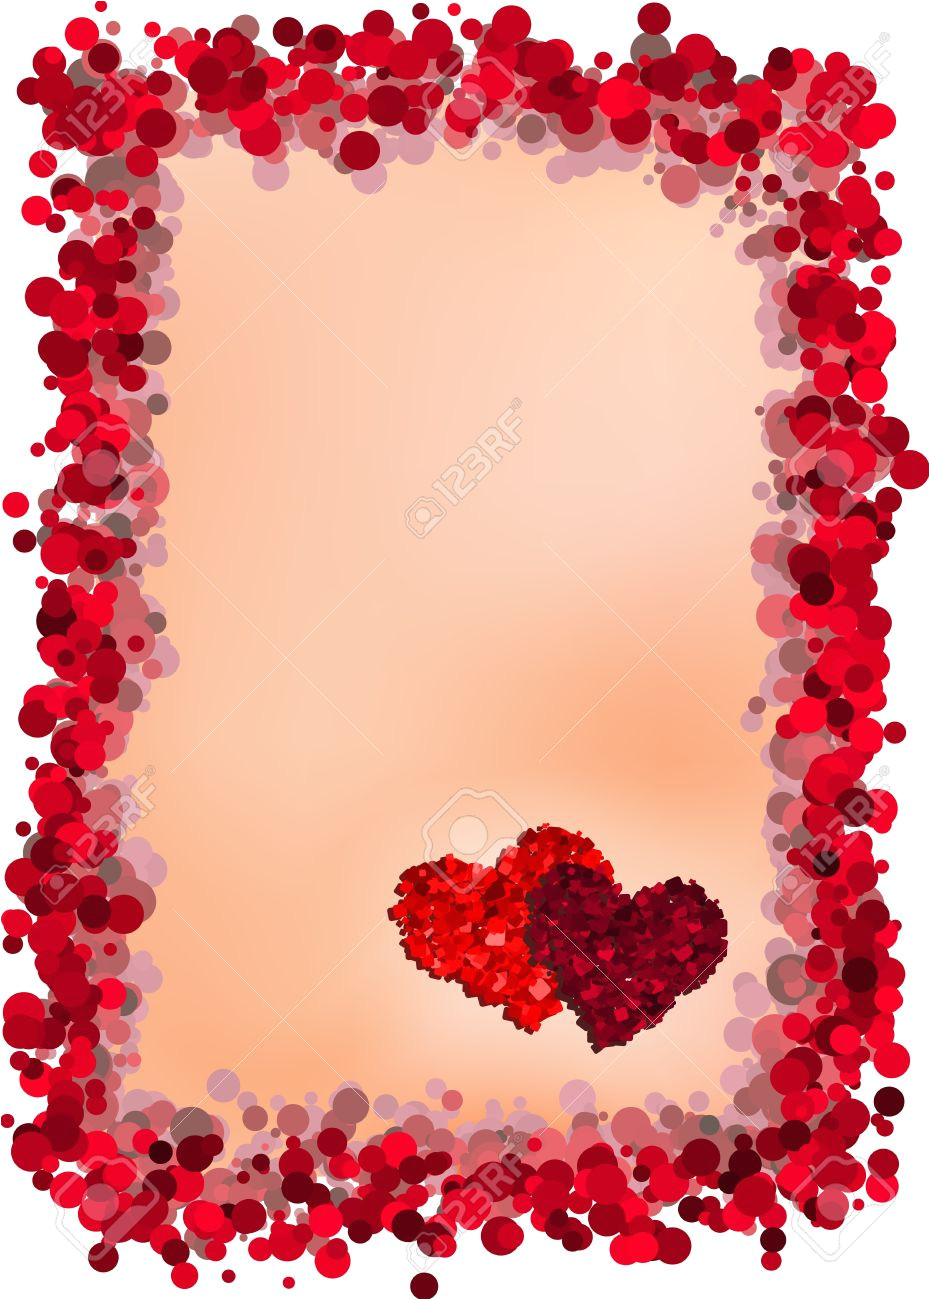 8779127 valentine s day vector greeting card with border and two hearts jpg